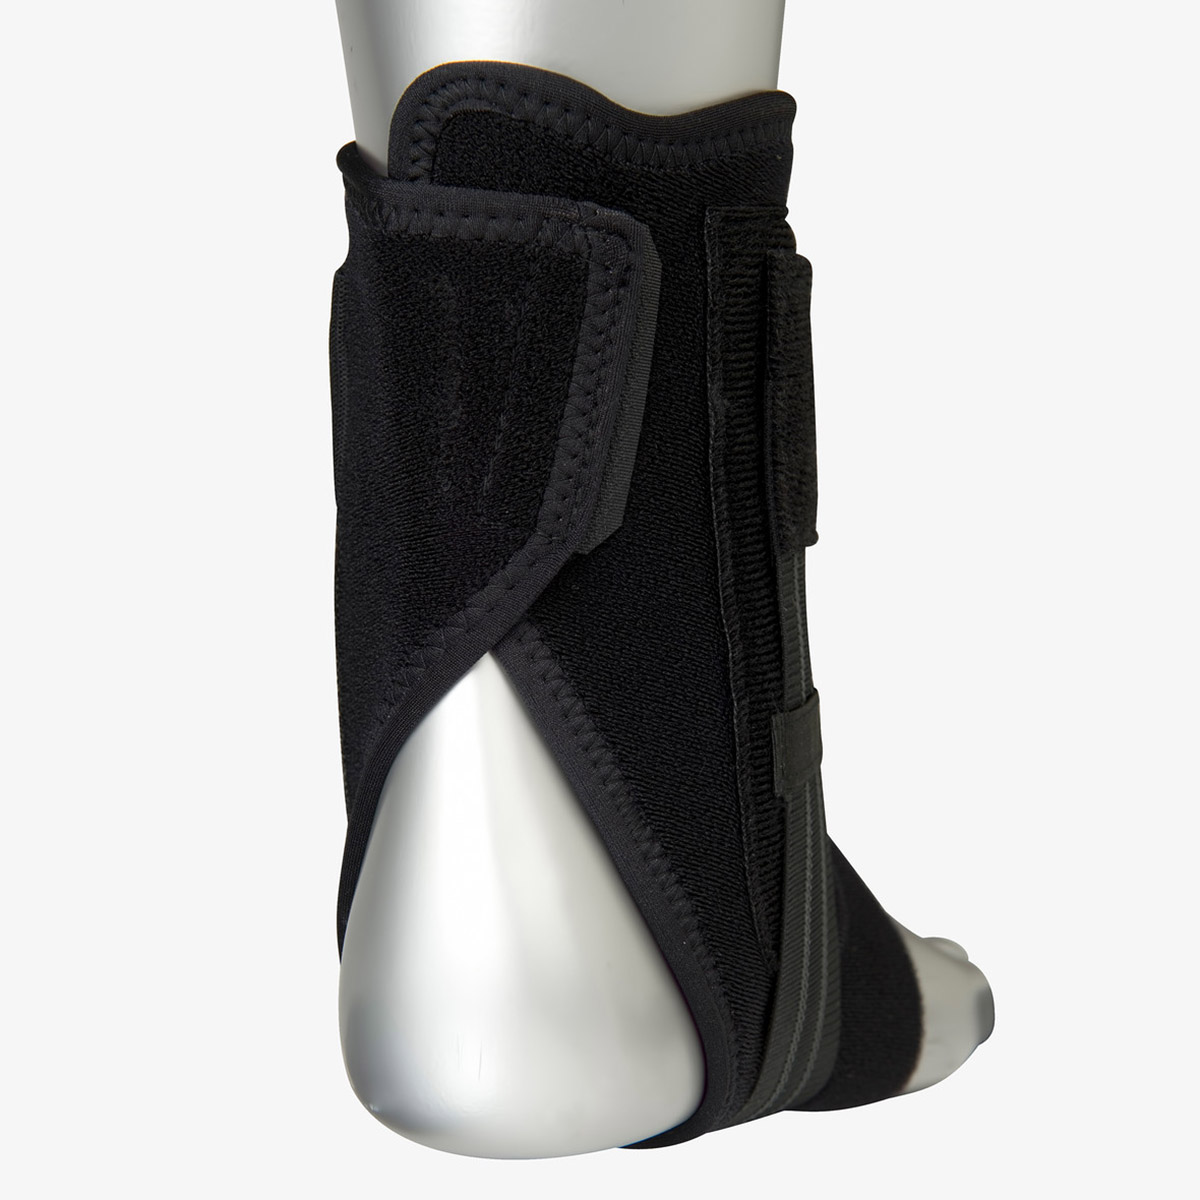 Zamst A1-S Ankle Brace, , large image number null